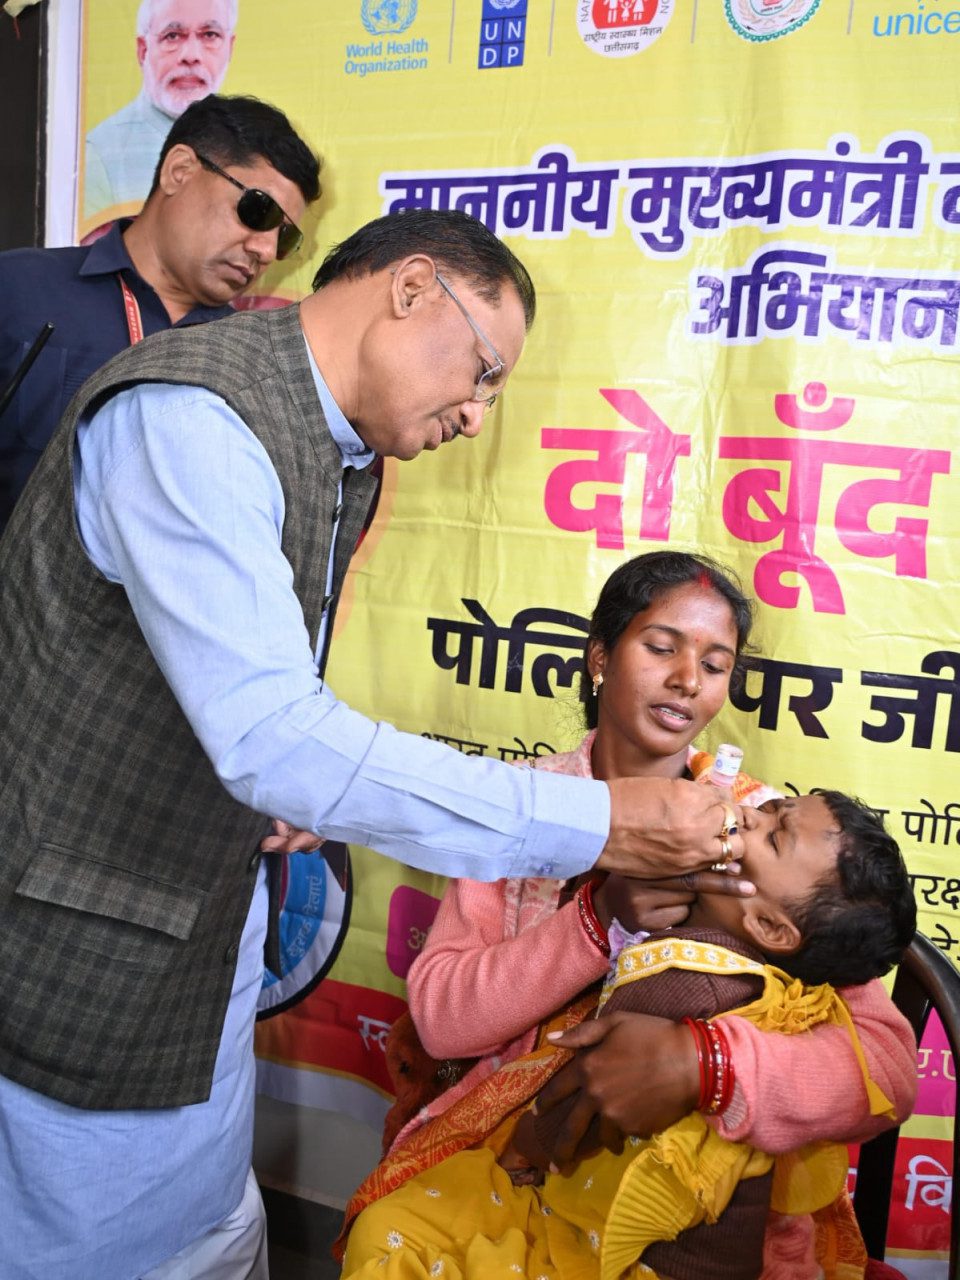 National Pulse Polio Campaign: Chief Minister inaugurated the National Intensive Pulse Polio Campaign by administering medicine to the children.